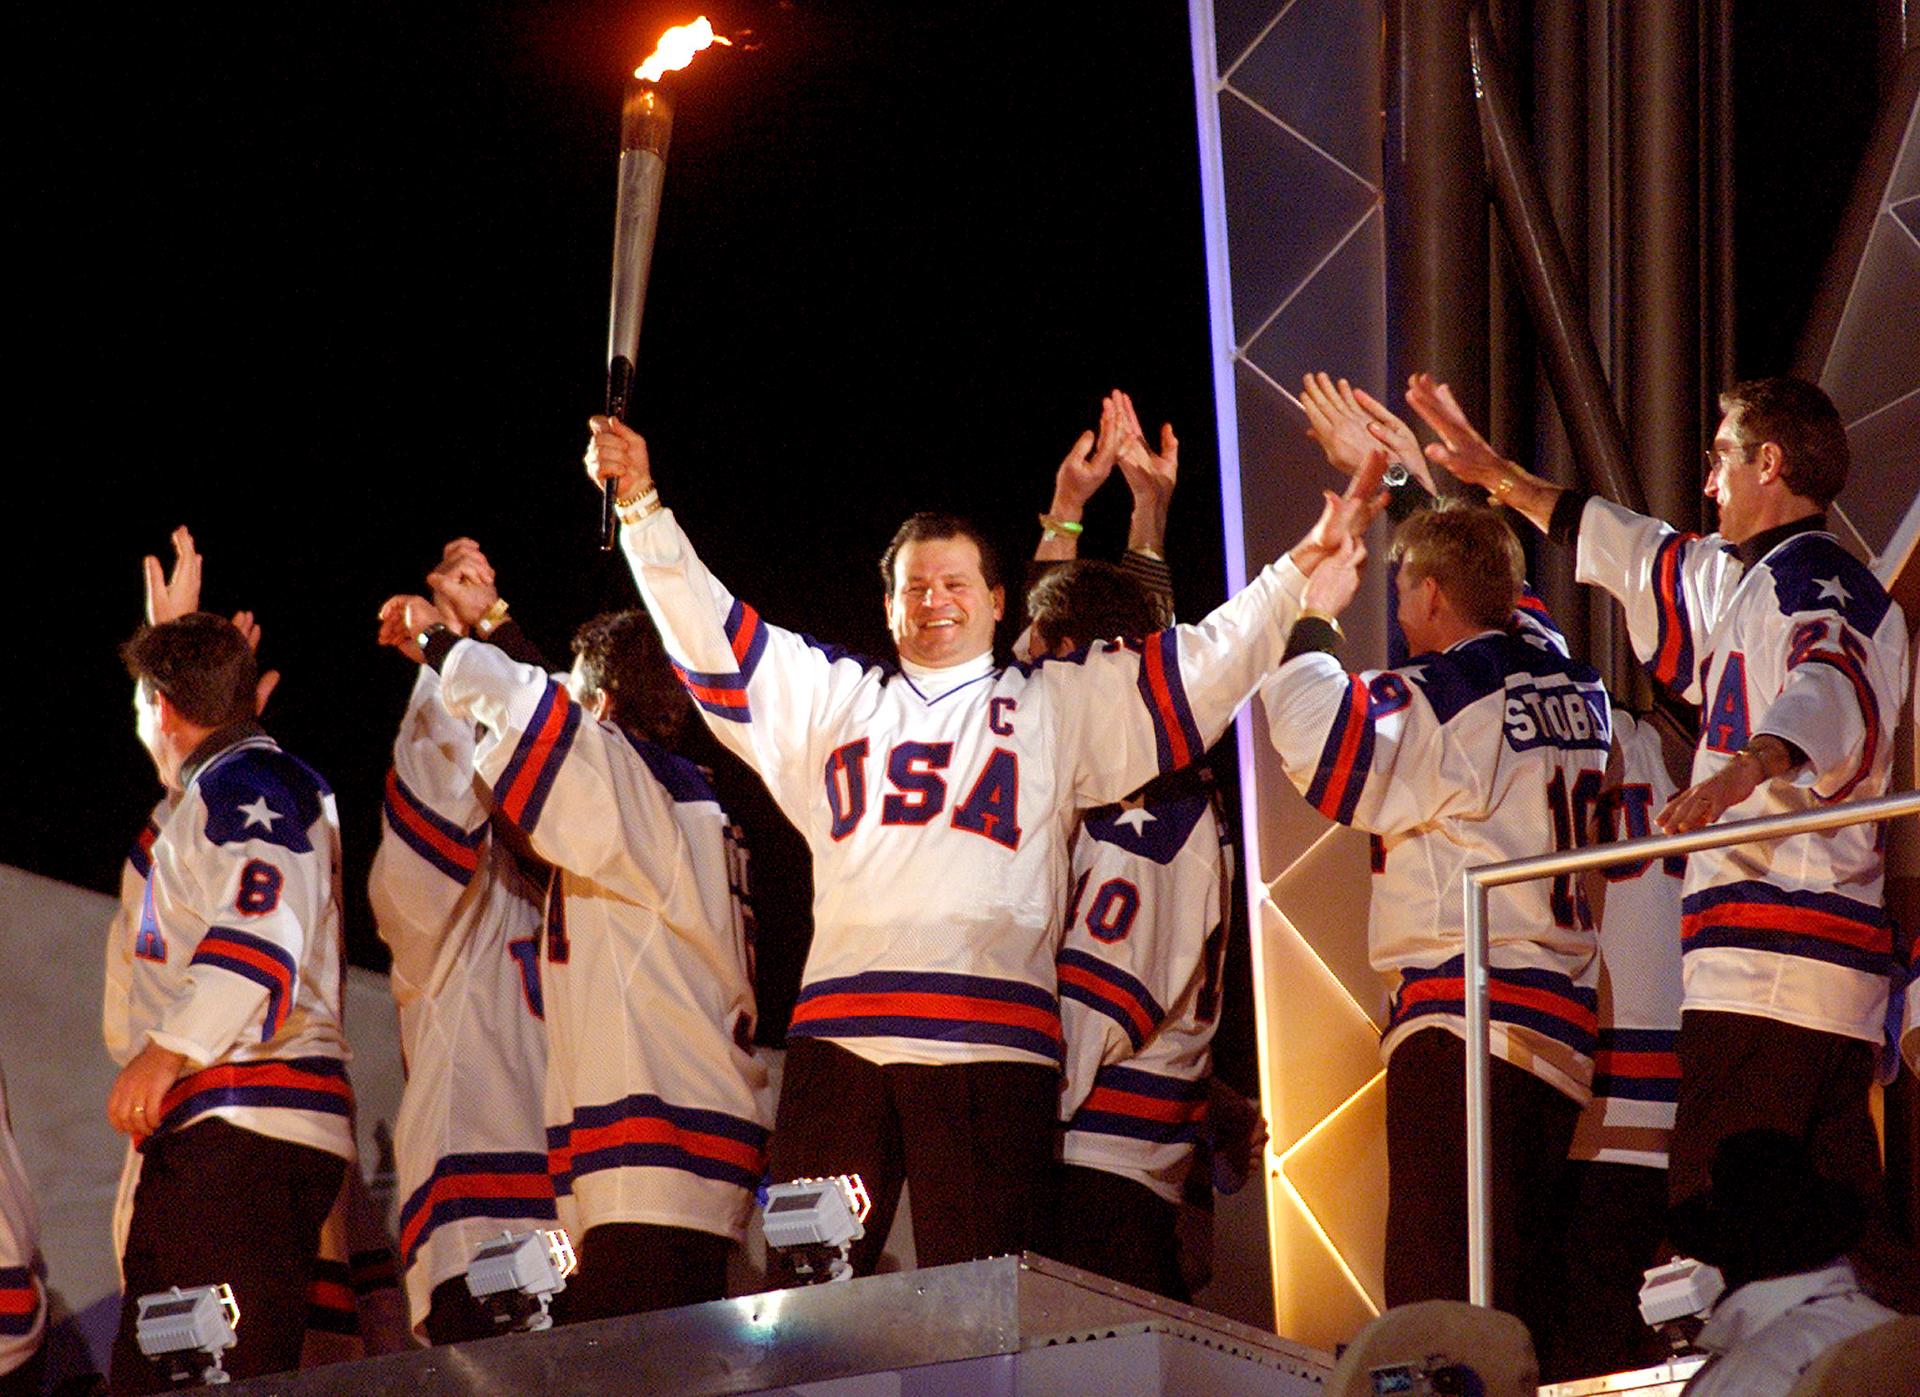 Members of the gold-medal winning 1980 US Olympic hockey team wave as their former team captain, Mike Eruzione, holds the Olympic torch during the opening ceremony of the Salt Lake 2002 Olympic Winter Games, February 8, 2002.